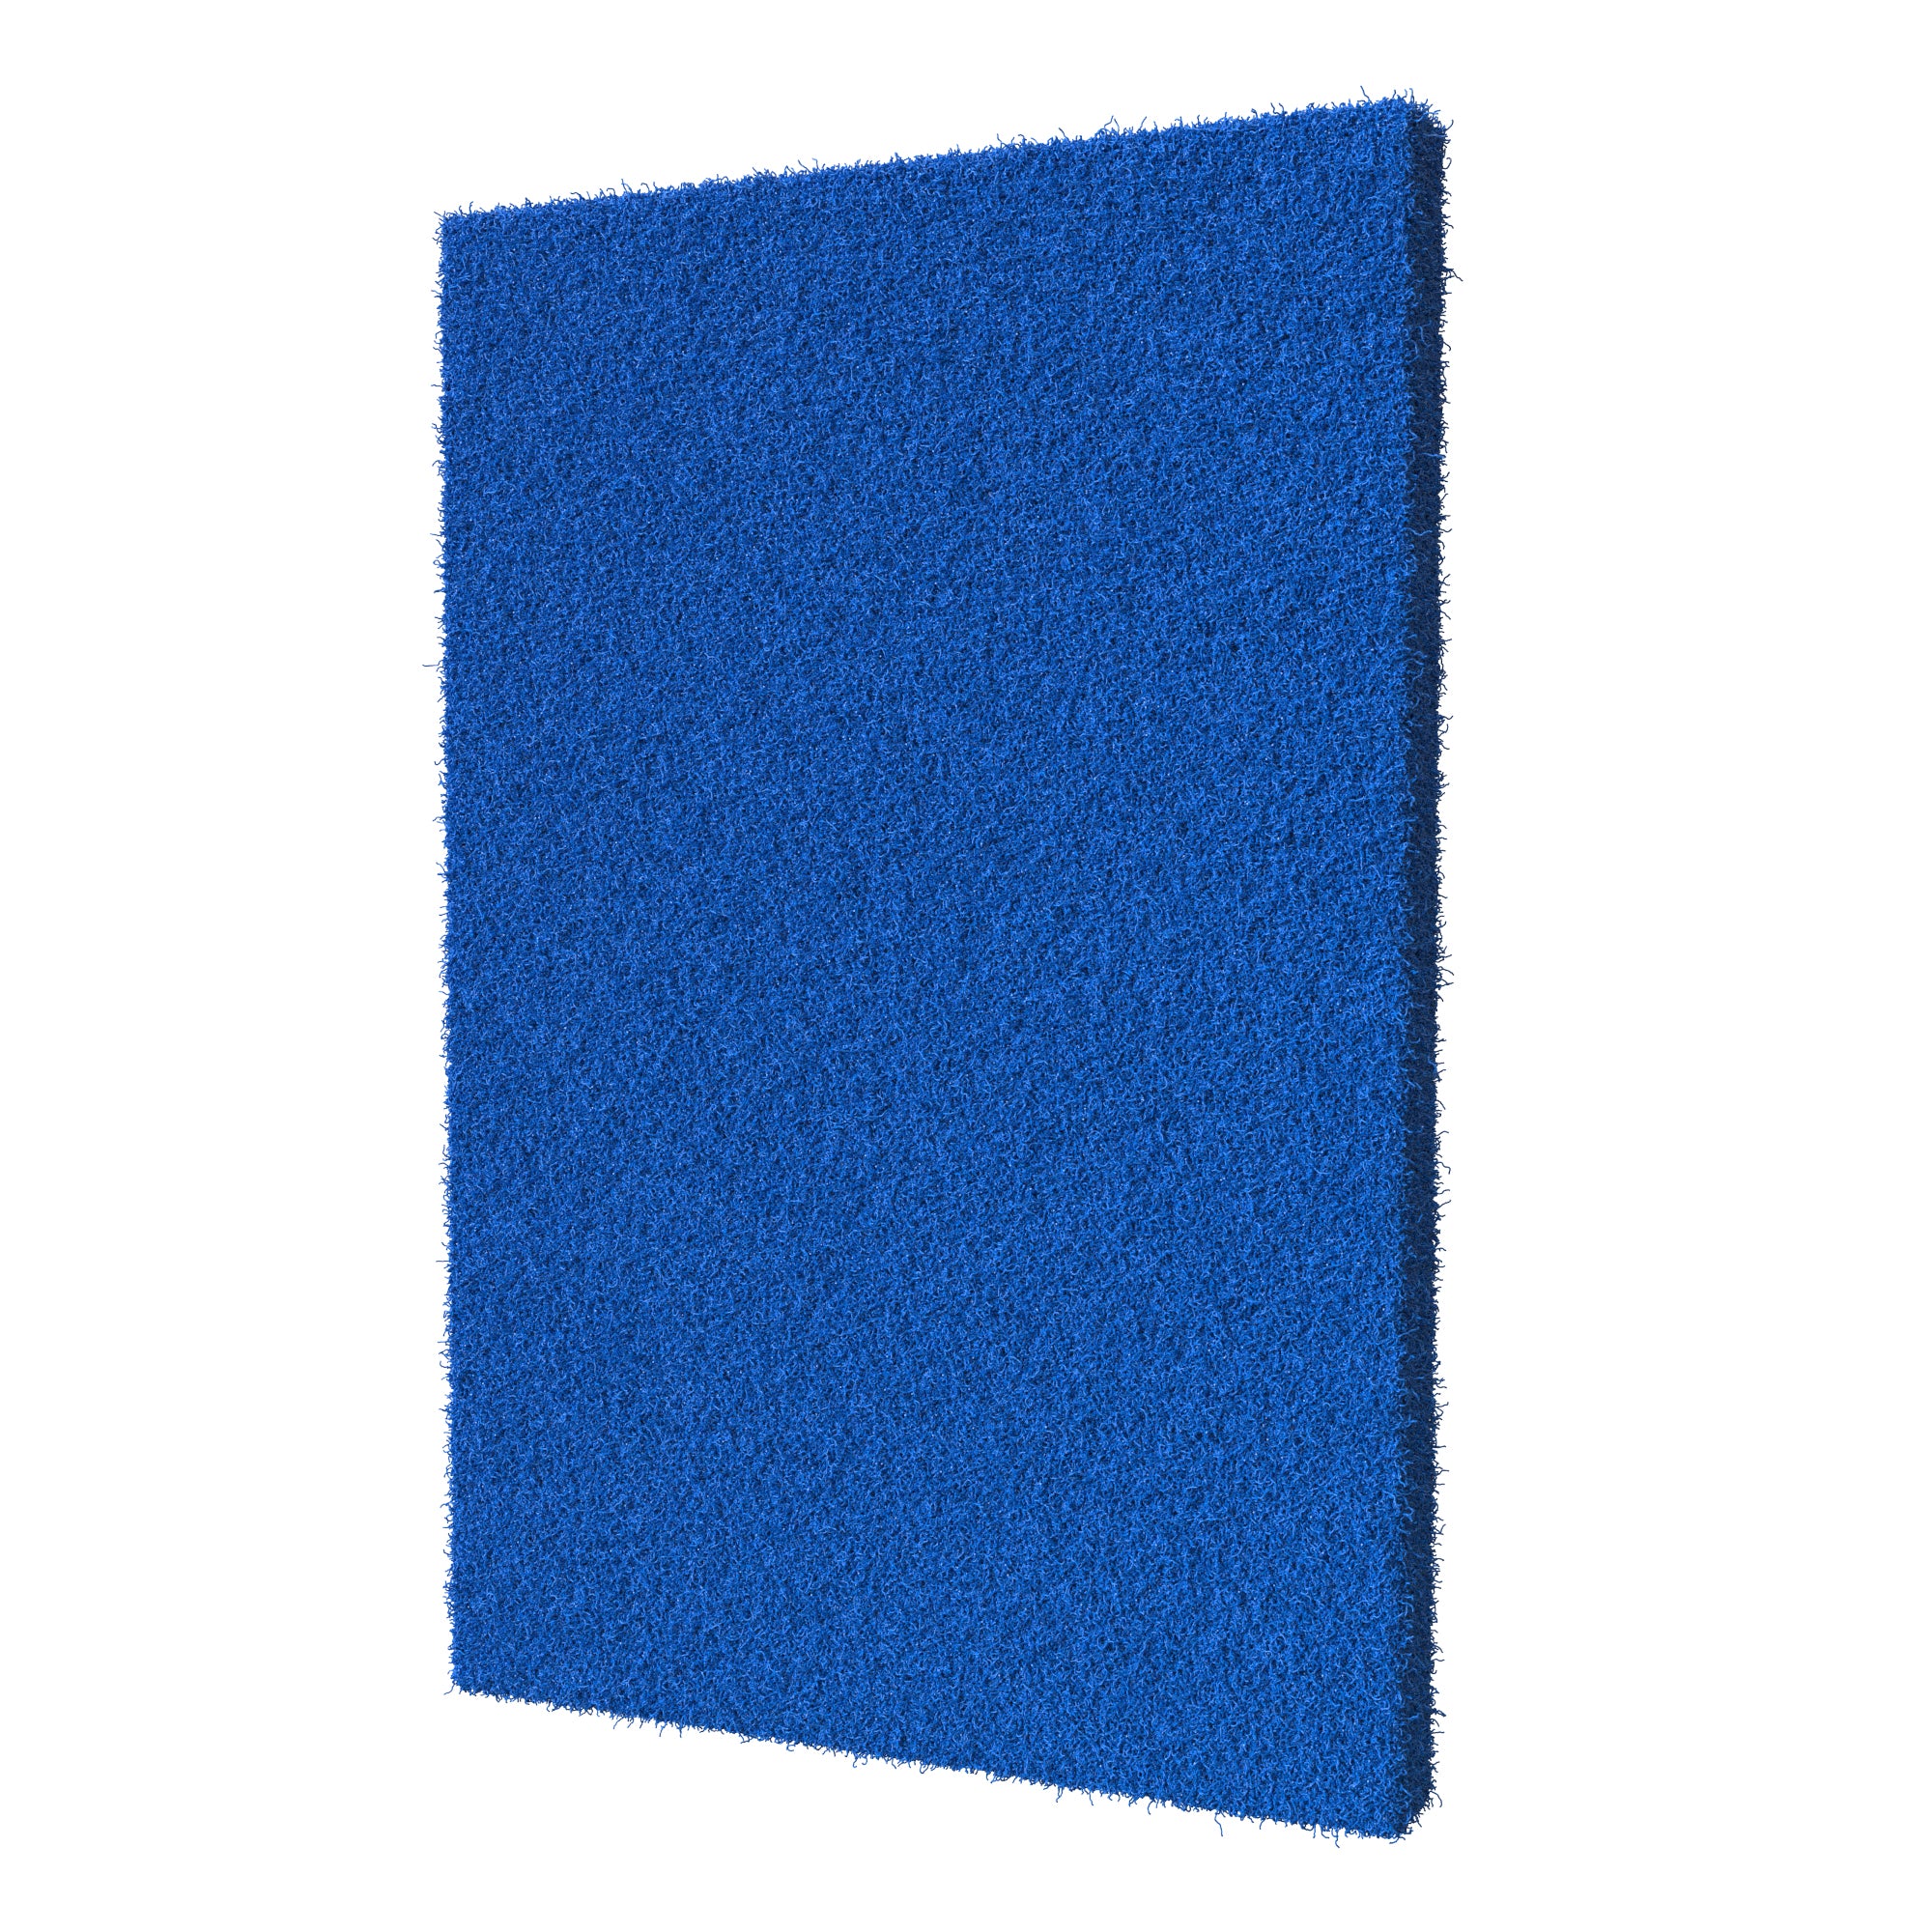 Biodefensor Washable Reusable HVAC AC Furnace Filter - MERV 6 - 20x30x1 Cut to Fit Material, Made in USA, Blue